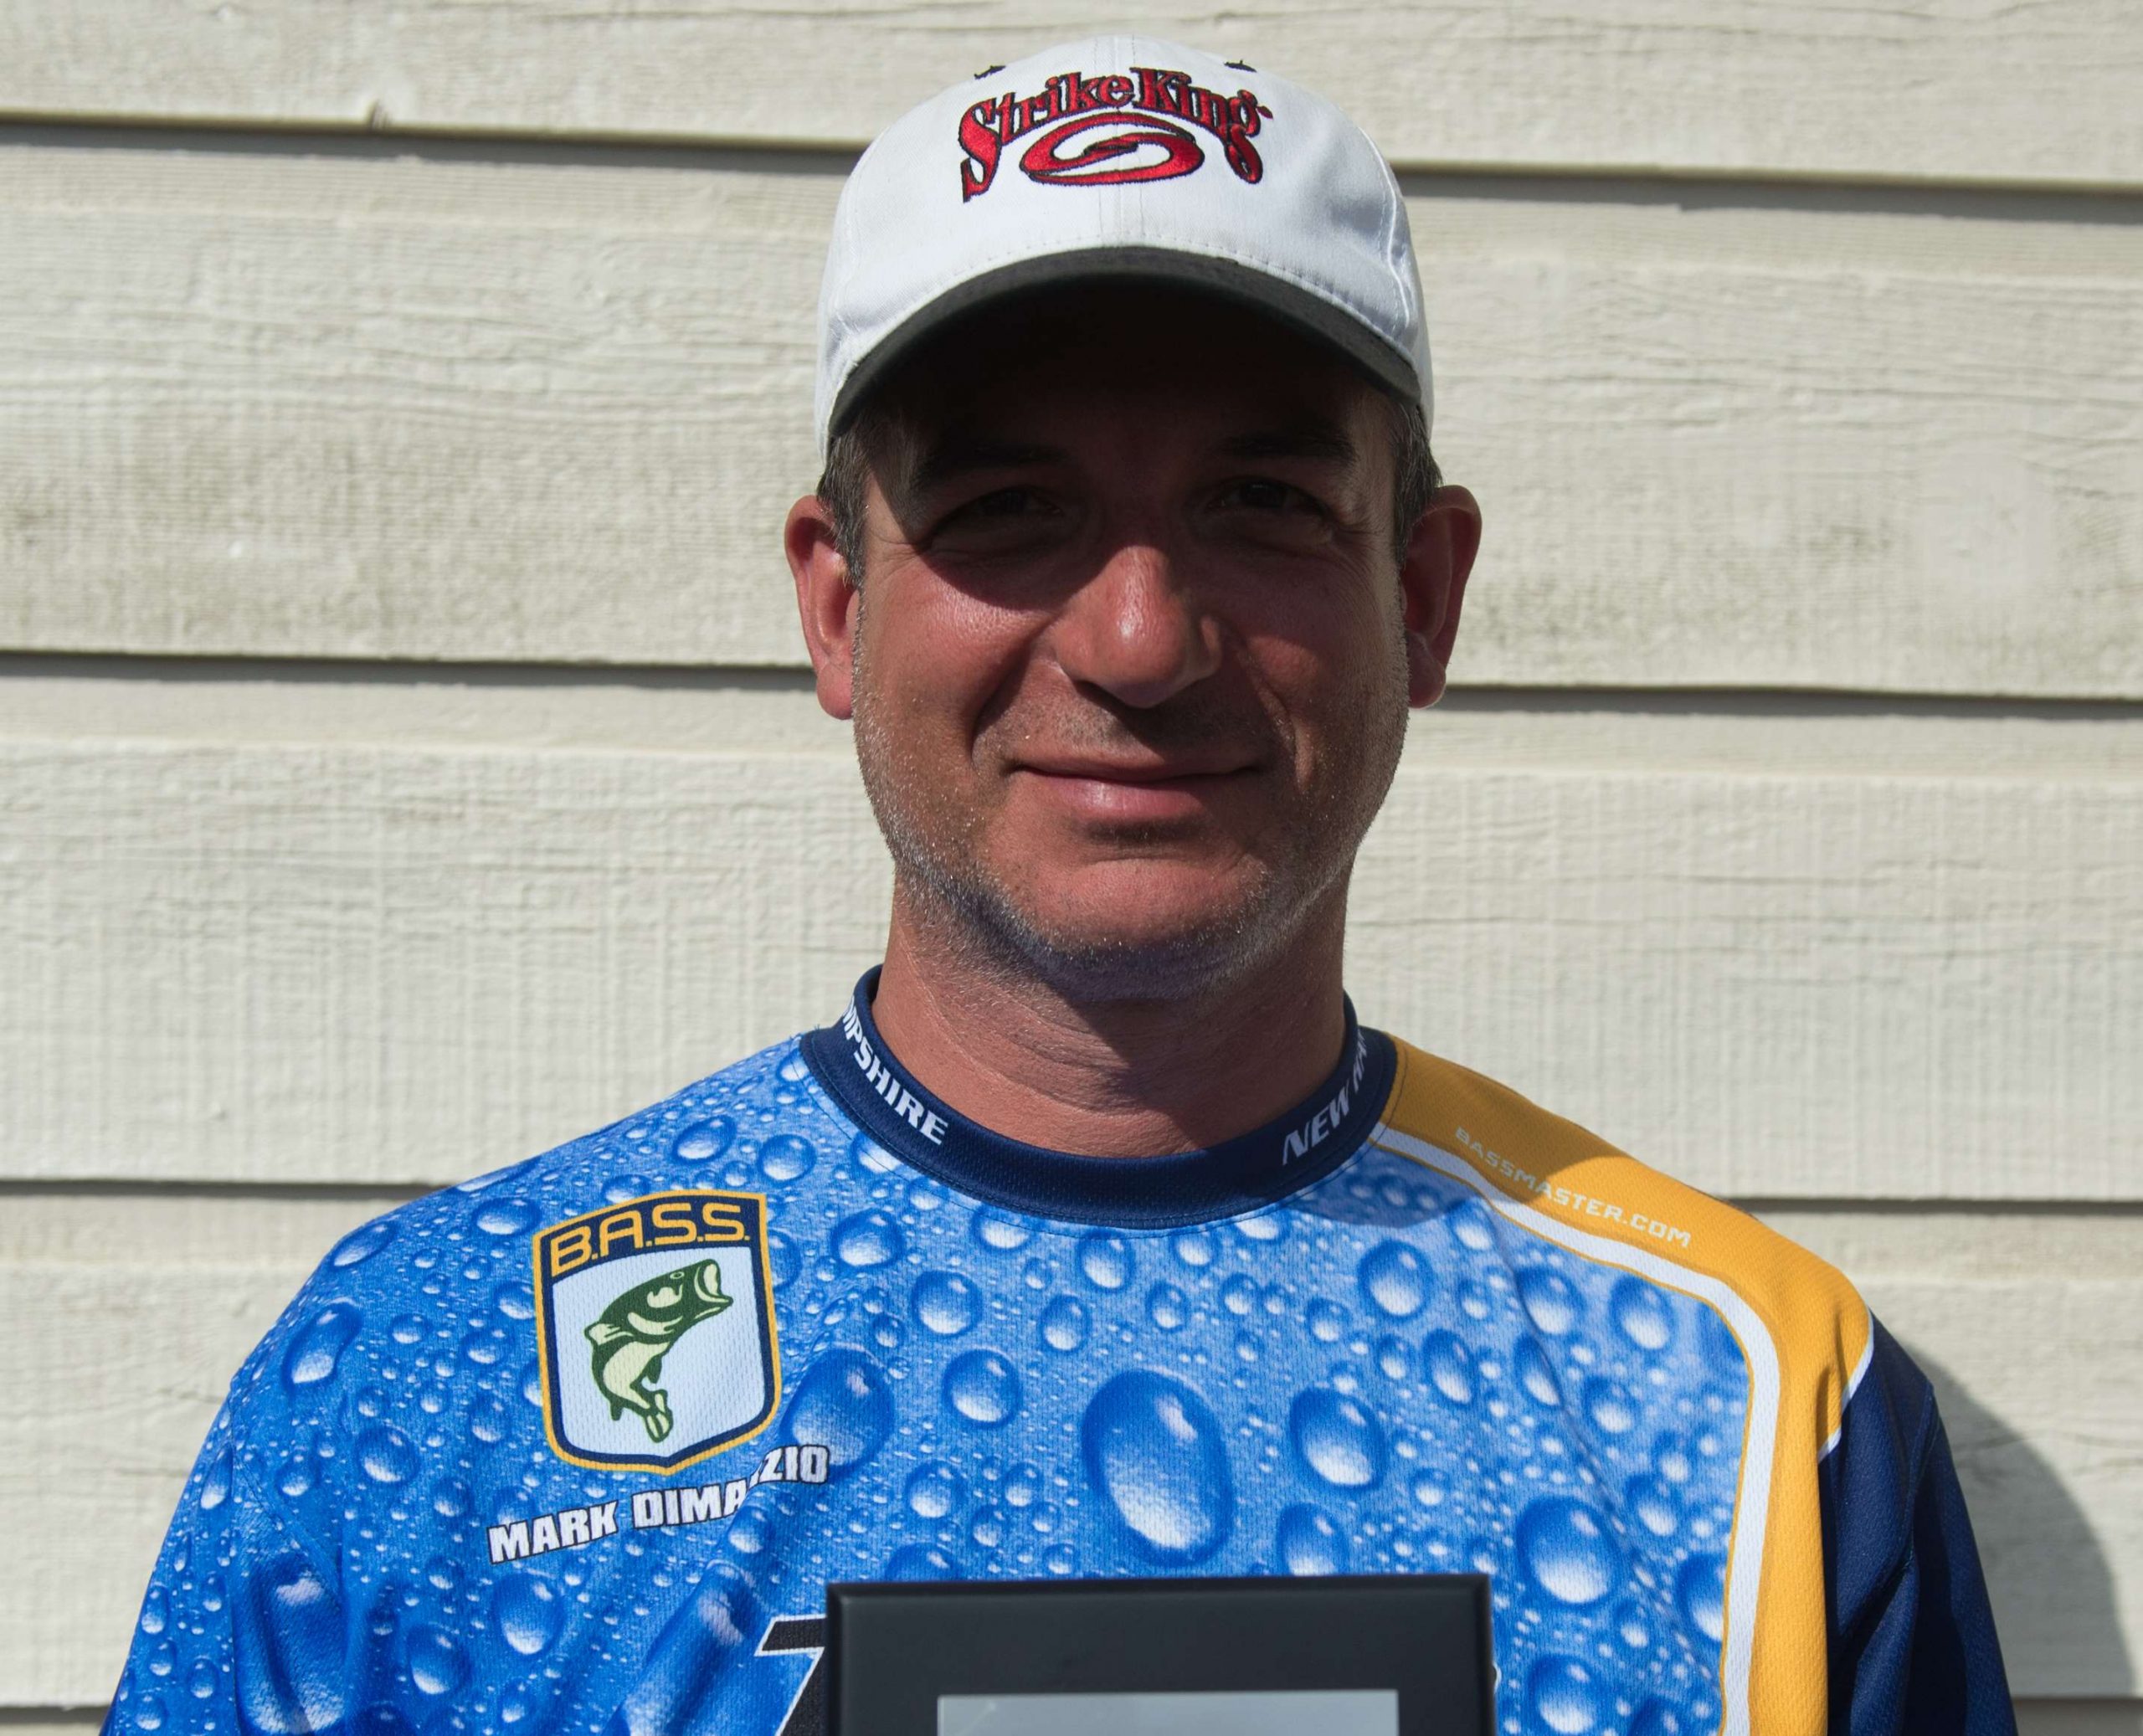 Mark DiMarzio <br>
New Hampshire Boater <br>
Mark DiMarzio is a member of the North Country Bronzebacks in New Hampshire. He works as a marketing executive. This championship will be his first. He likes the outdoors, especially hunting. Heâs sponsored by New Hampshire B.A.S.S. Nation, North Country Bronzebacks and Dobyns Rods.